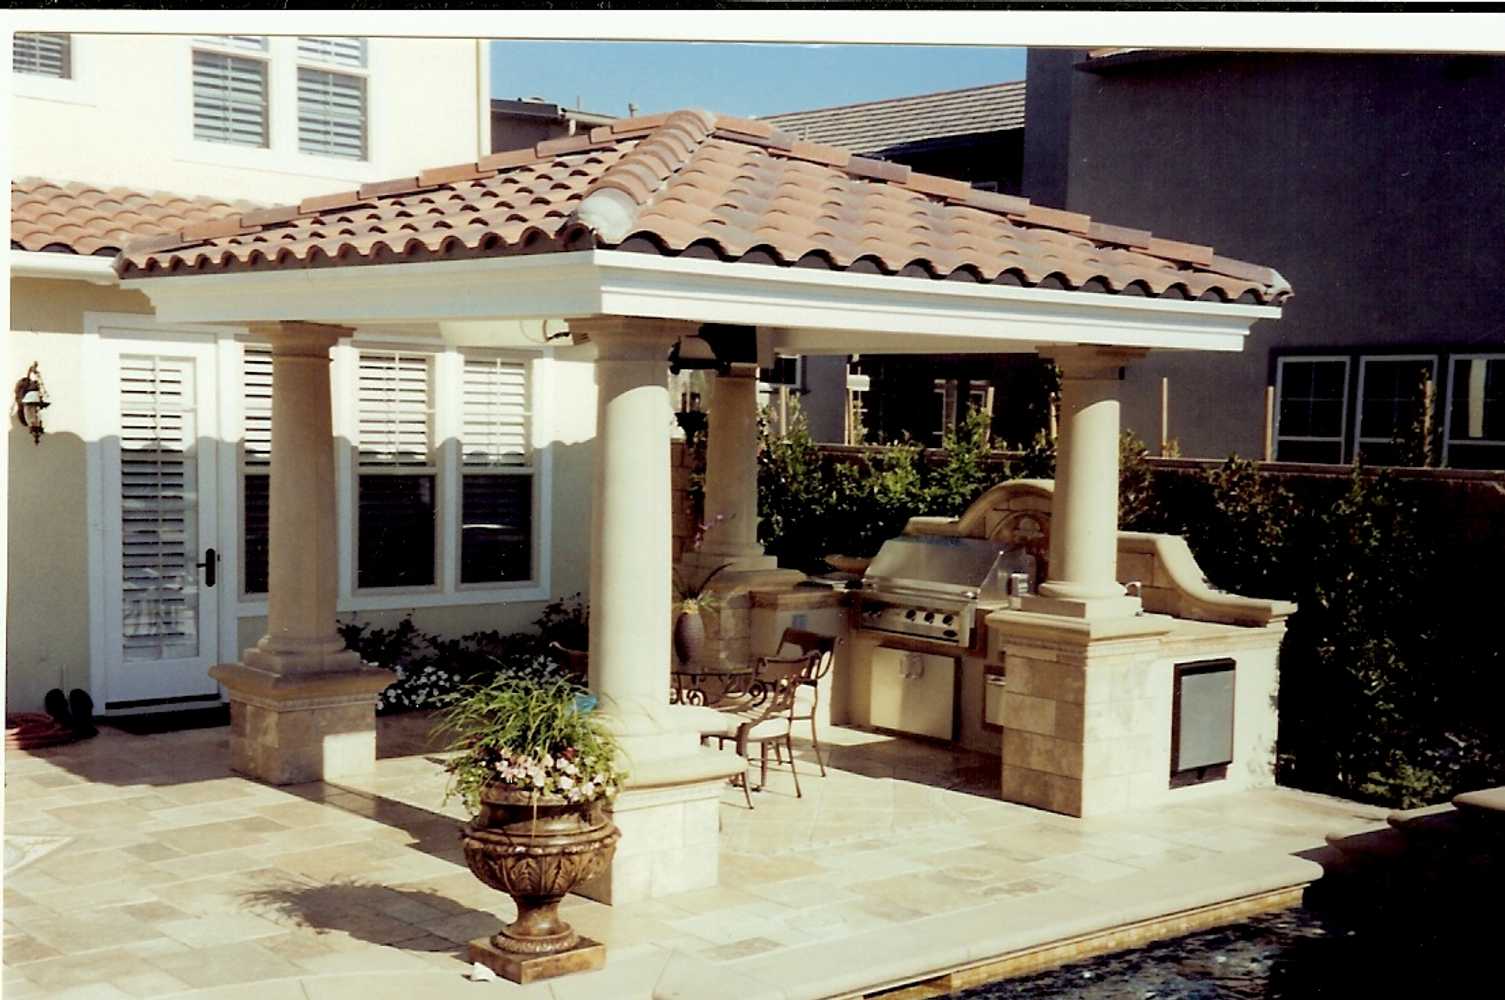 Photo(s) from Ponce Construction Pools & Landscaping